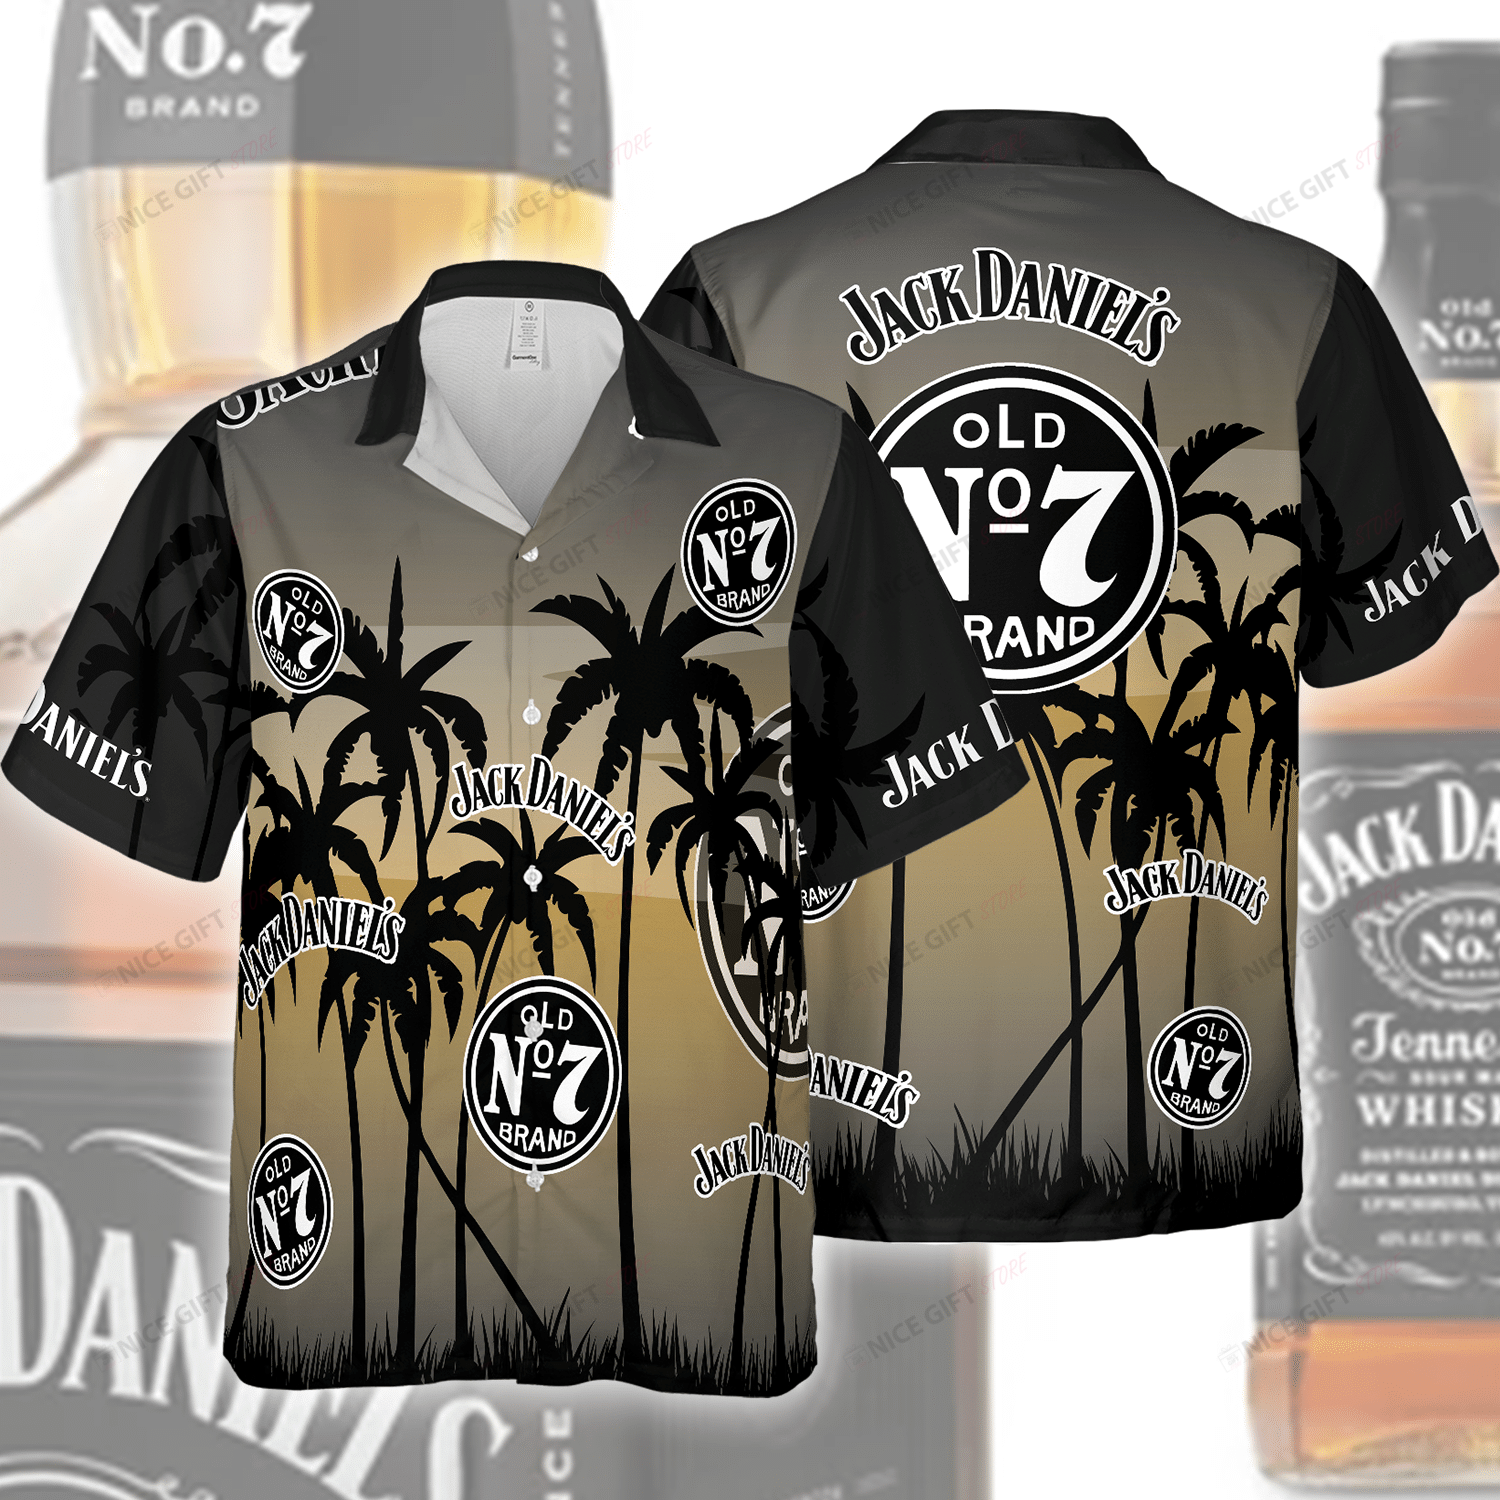 If you're a fan of a Hawaiian Shirt, you can choose one at our store 80